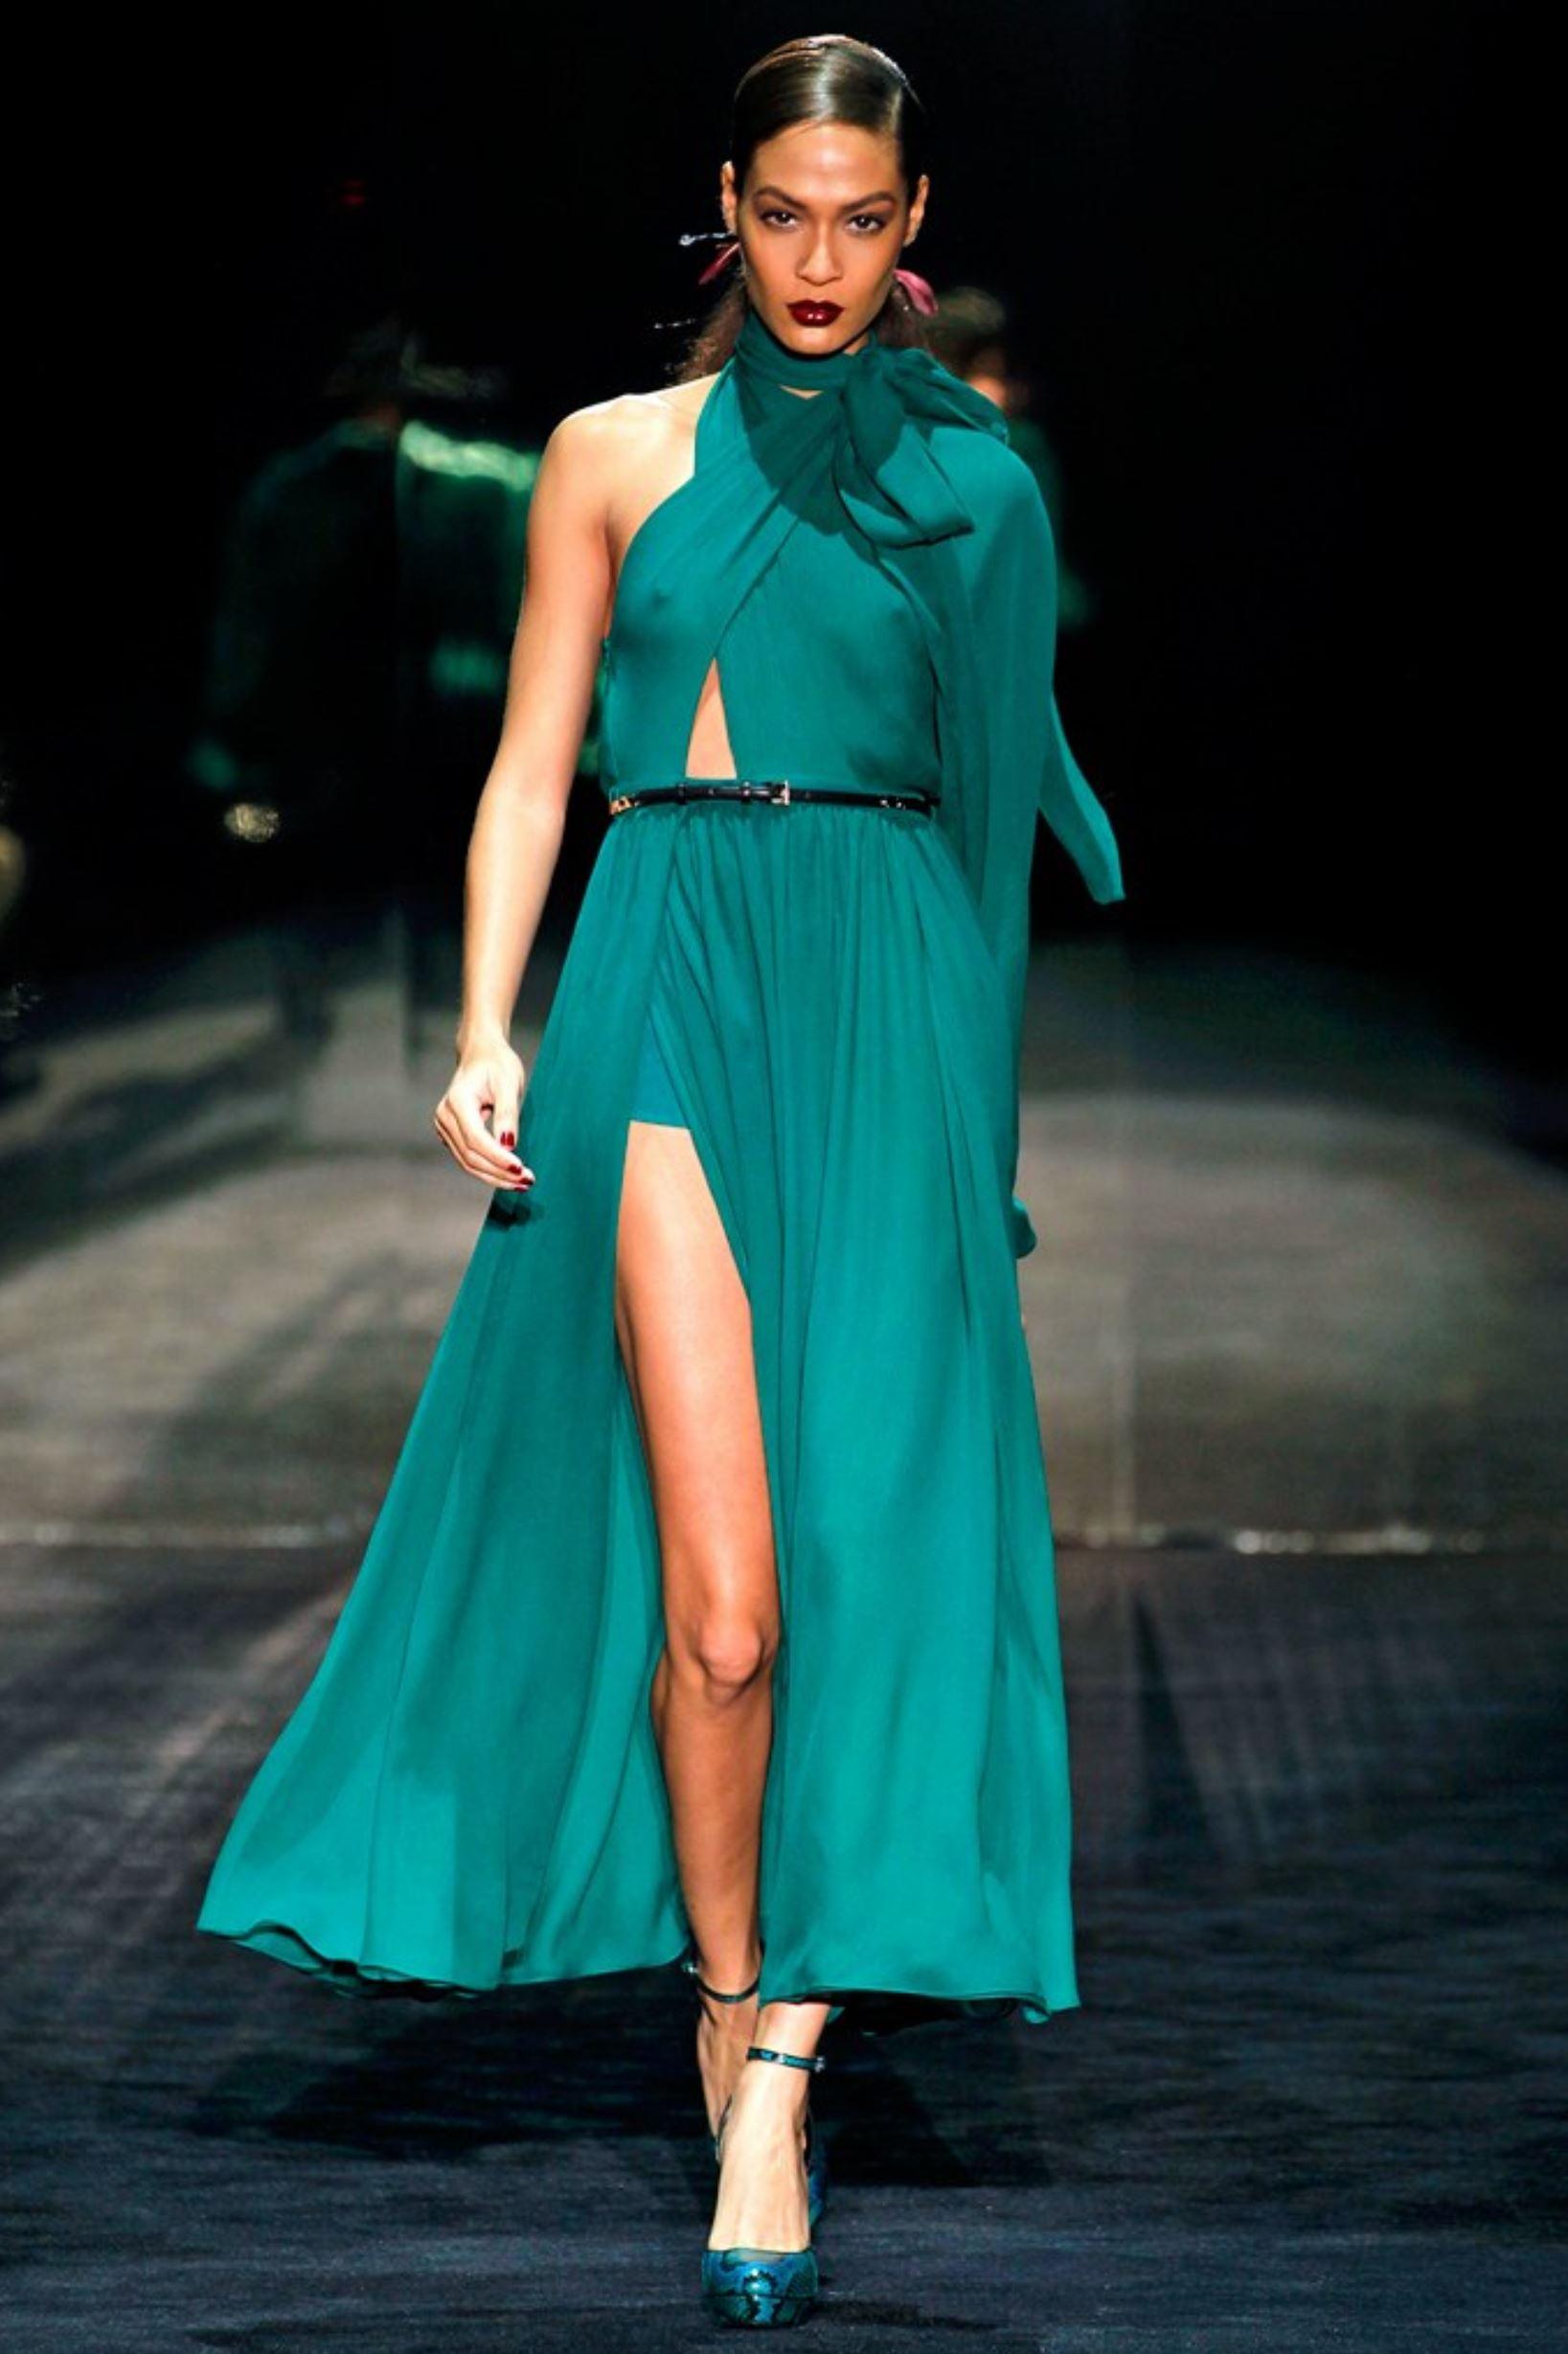 Gucci 
Brand New
From Gucci's 90th anniversary Fall Runway show, Frida Giannini cited her influence was Anjelica Huston
$2425
* Python Heels
* Rare Ad Runway Heels 
* Size: 37
* Green Teal Turquoise Snakeskin Python Throughout
* Adjustable Ankle